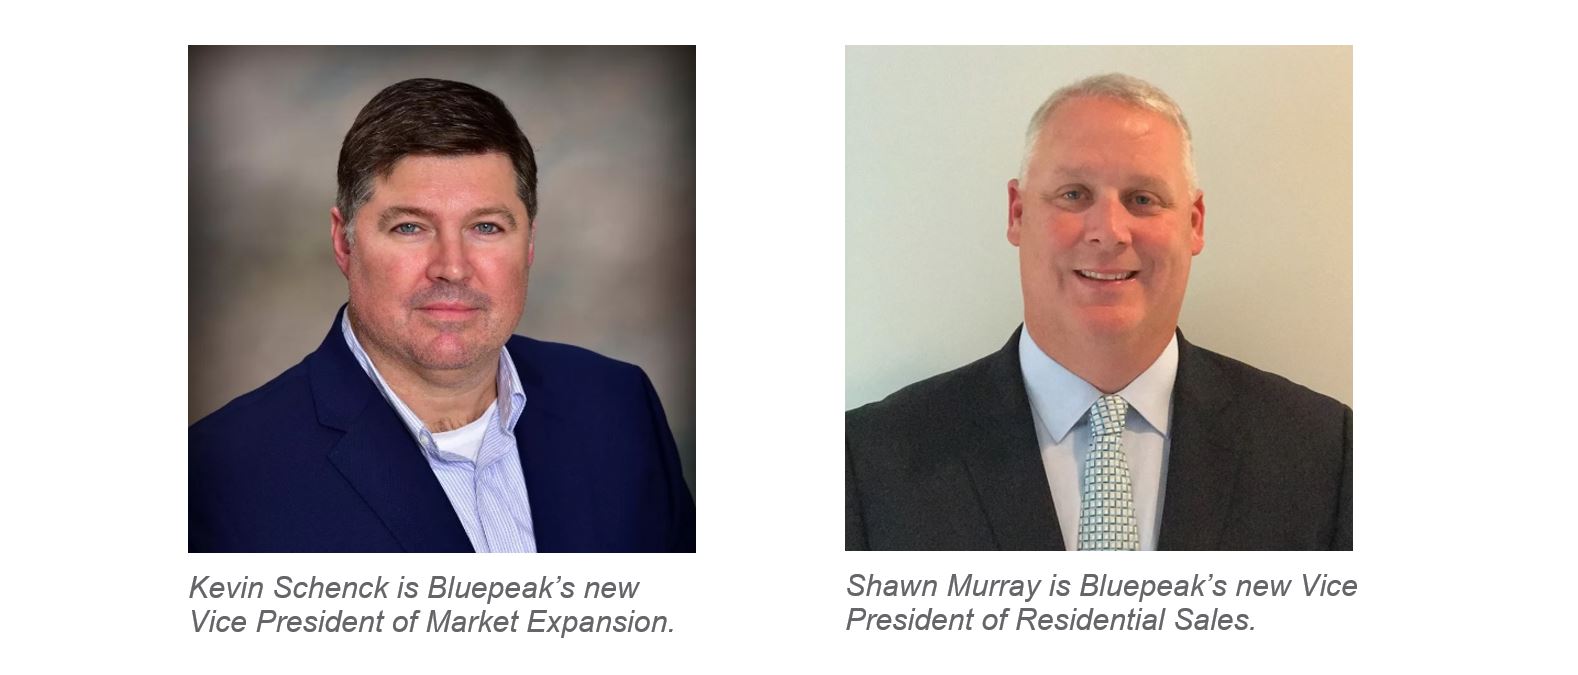 Kevin Schenck the new Vice President of Market Expansion and Shawn Murray the new Vice President of Residential Sales